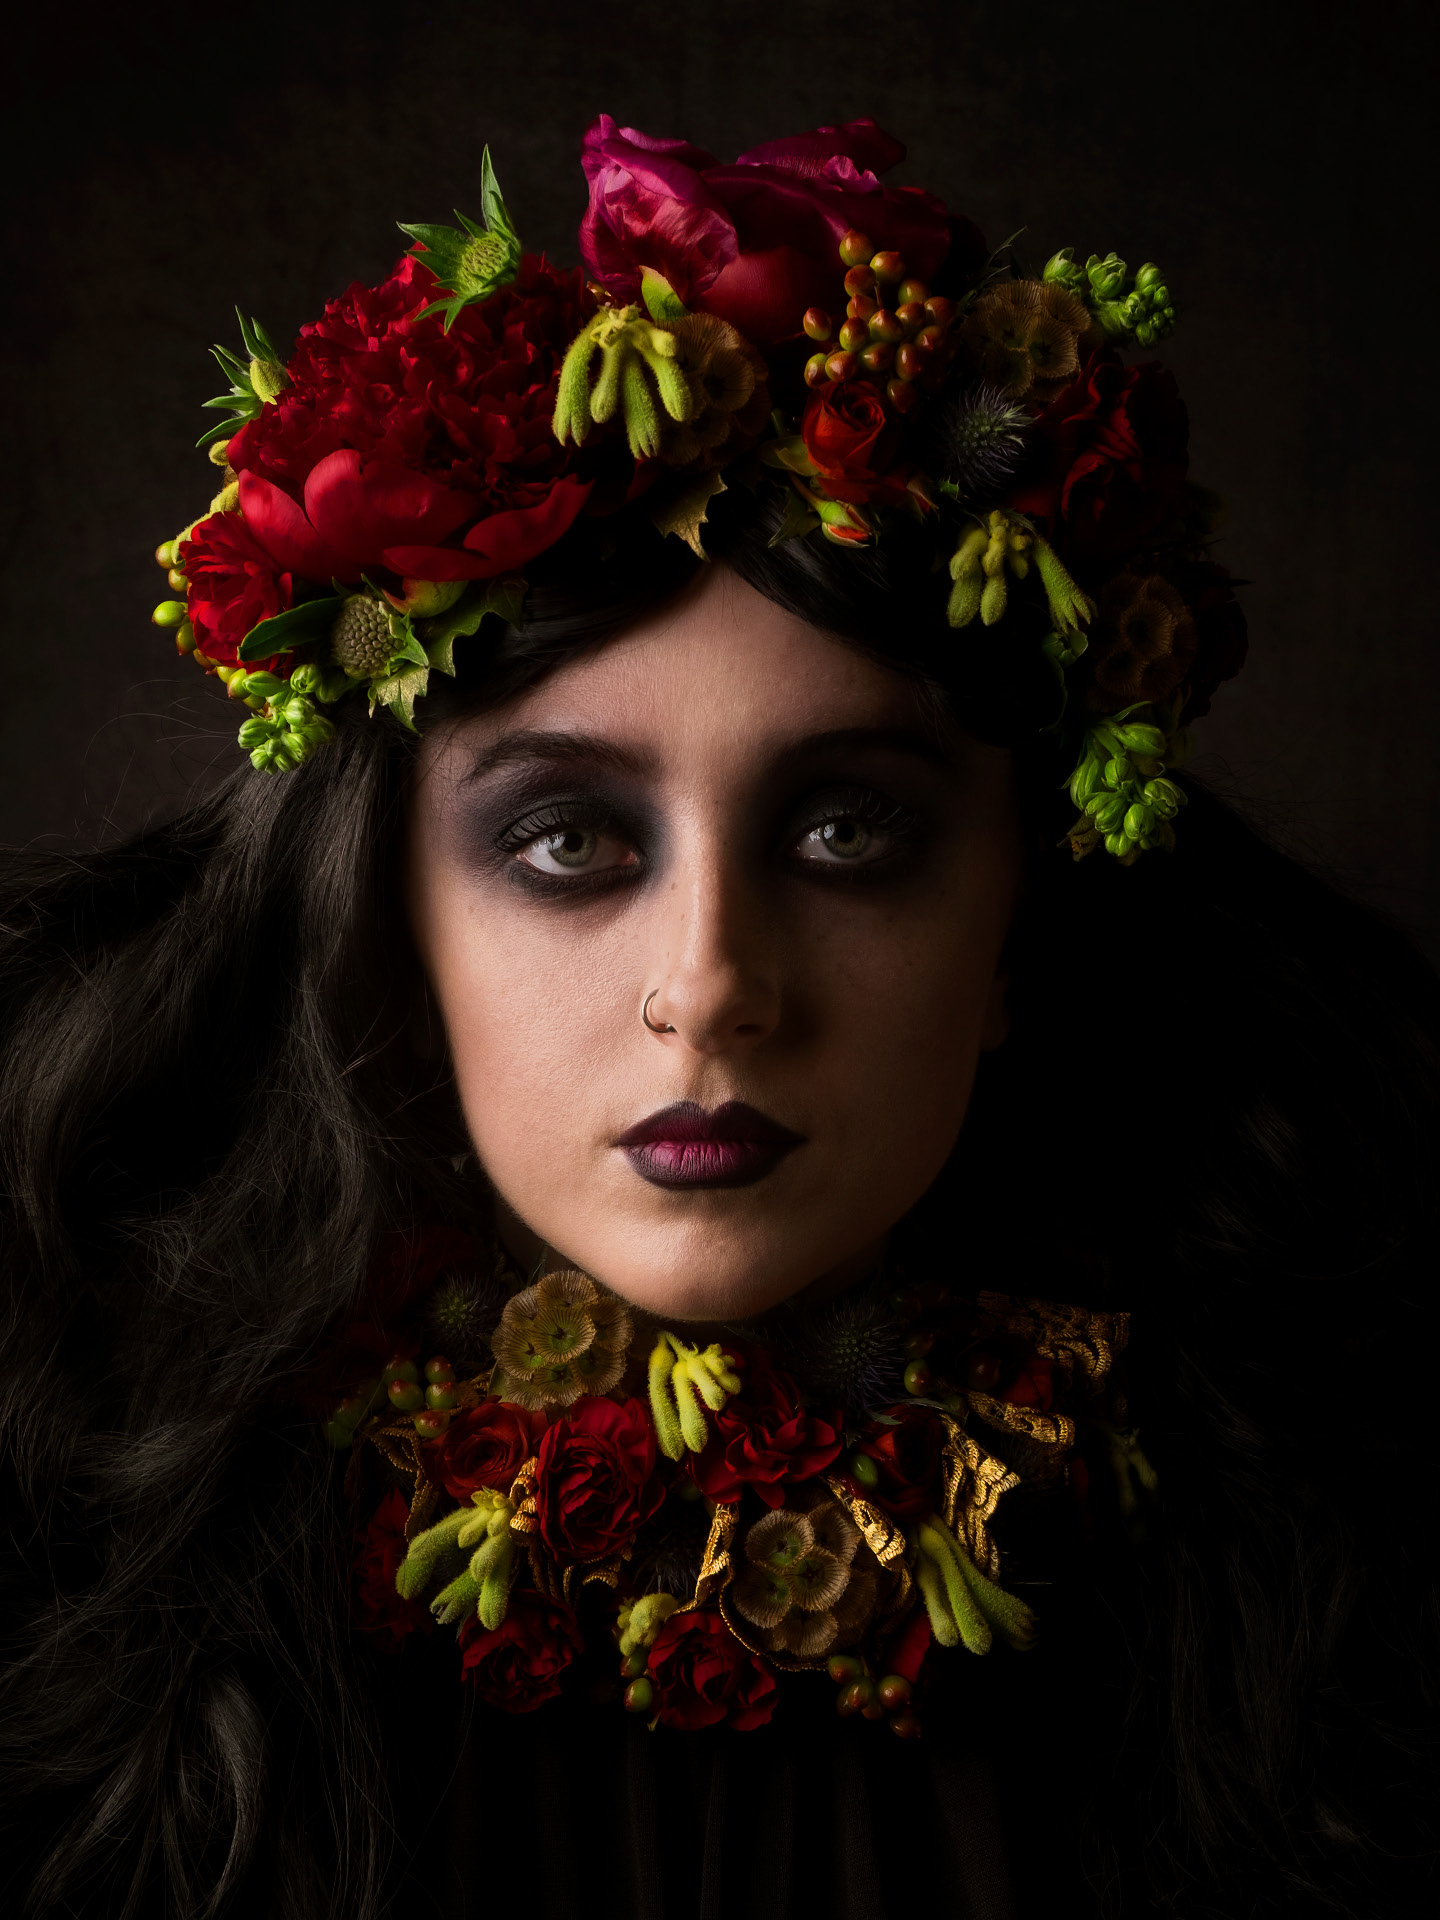 Portrait photography of model Bethan Perkins with coral crown and neck ruffle with dark makeup on her eyes and lips, with nose piercing by Ben Budden